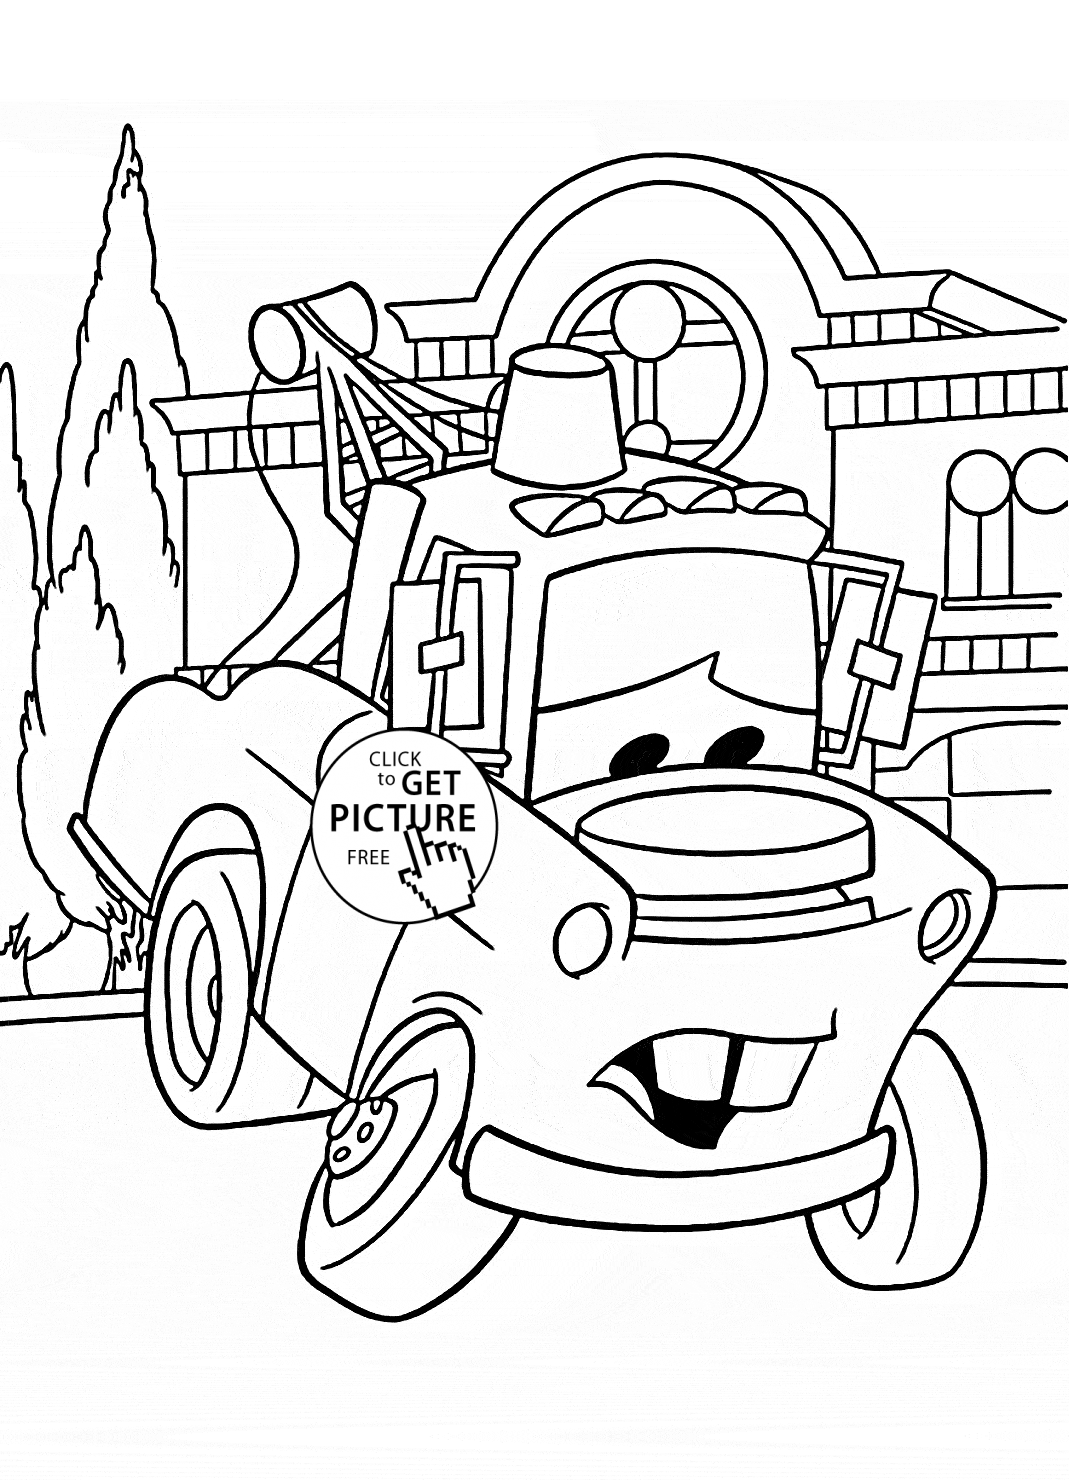 Tow Mater Feeling Sad - Cars coloring page for kids, disney ...